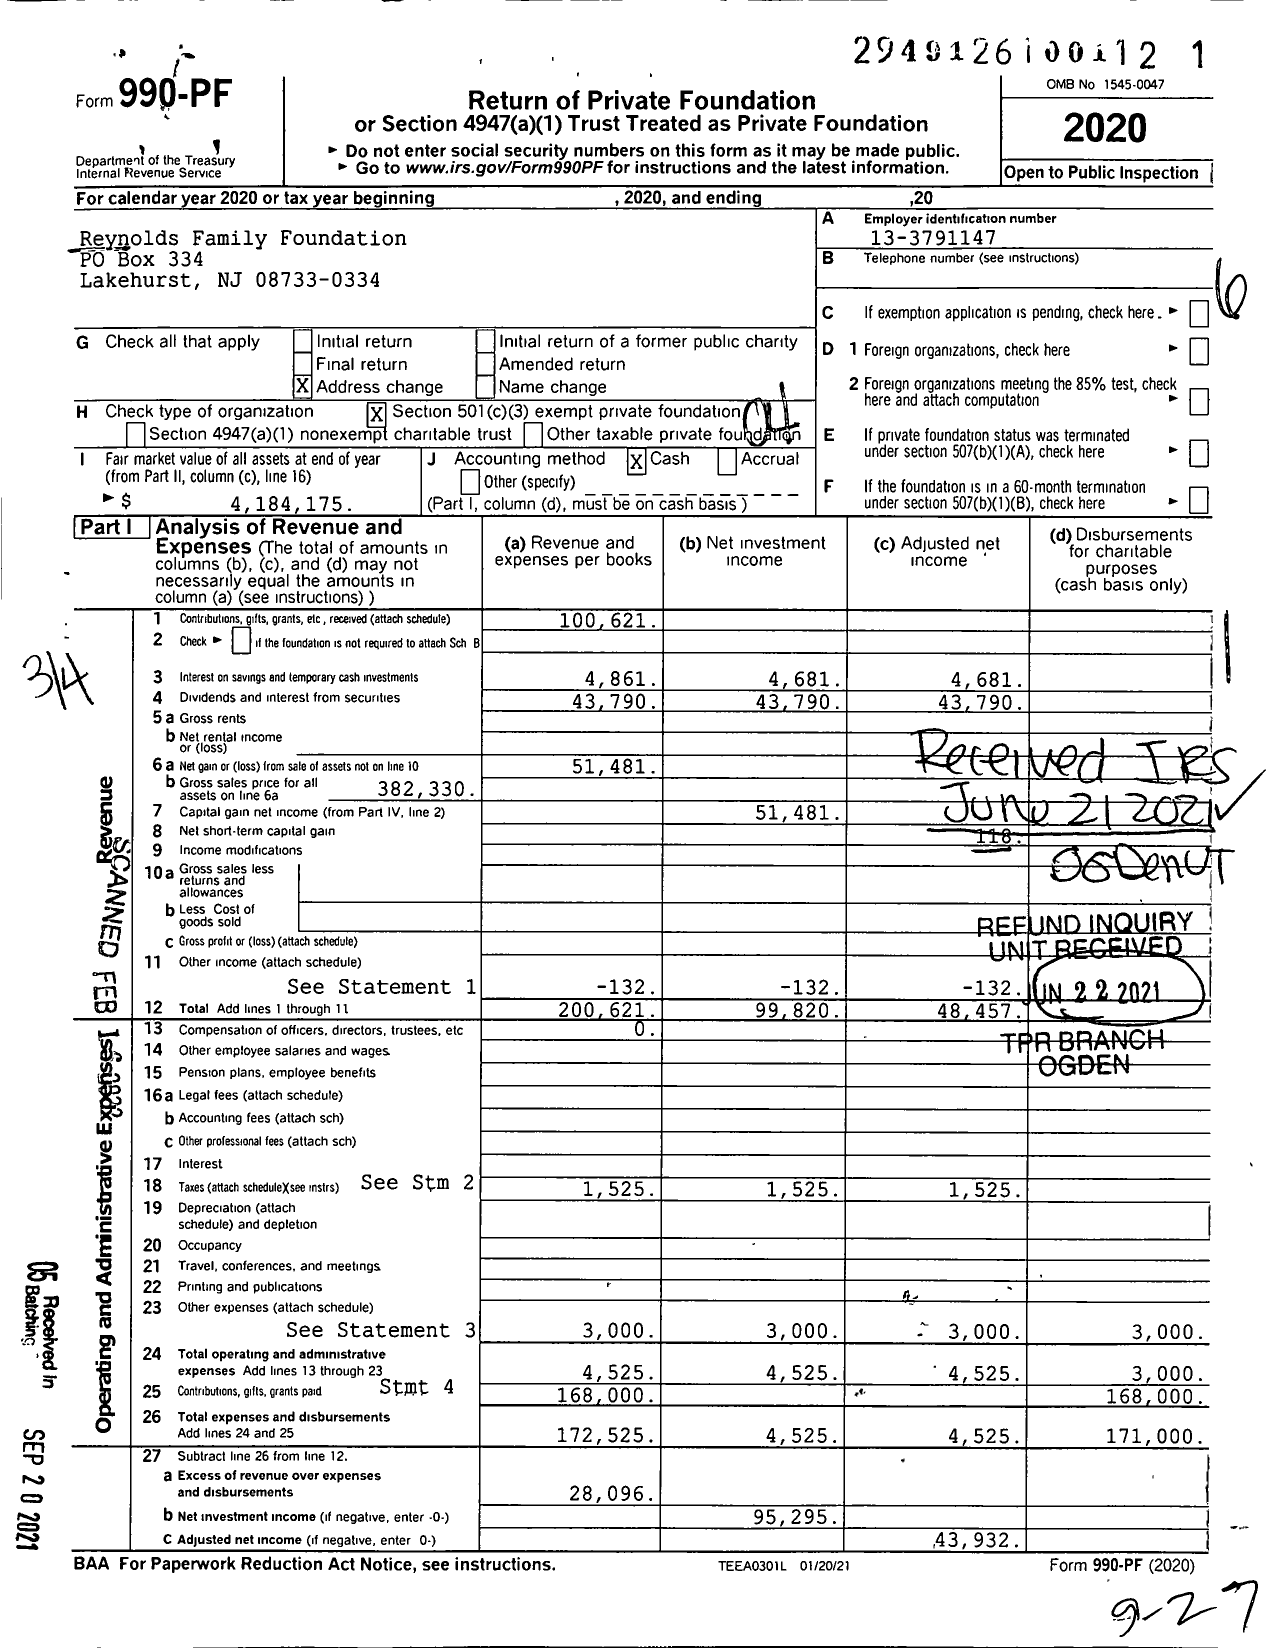 Image of first page of 2020 Form 990PF for Reynolds Family Foundation